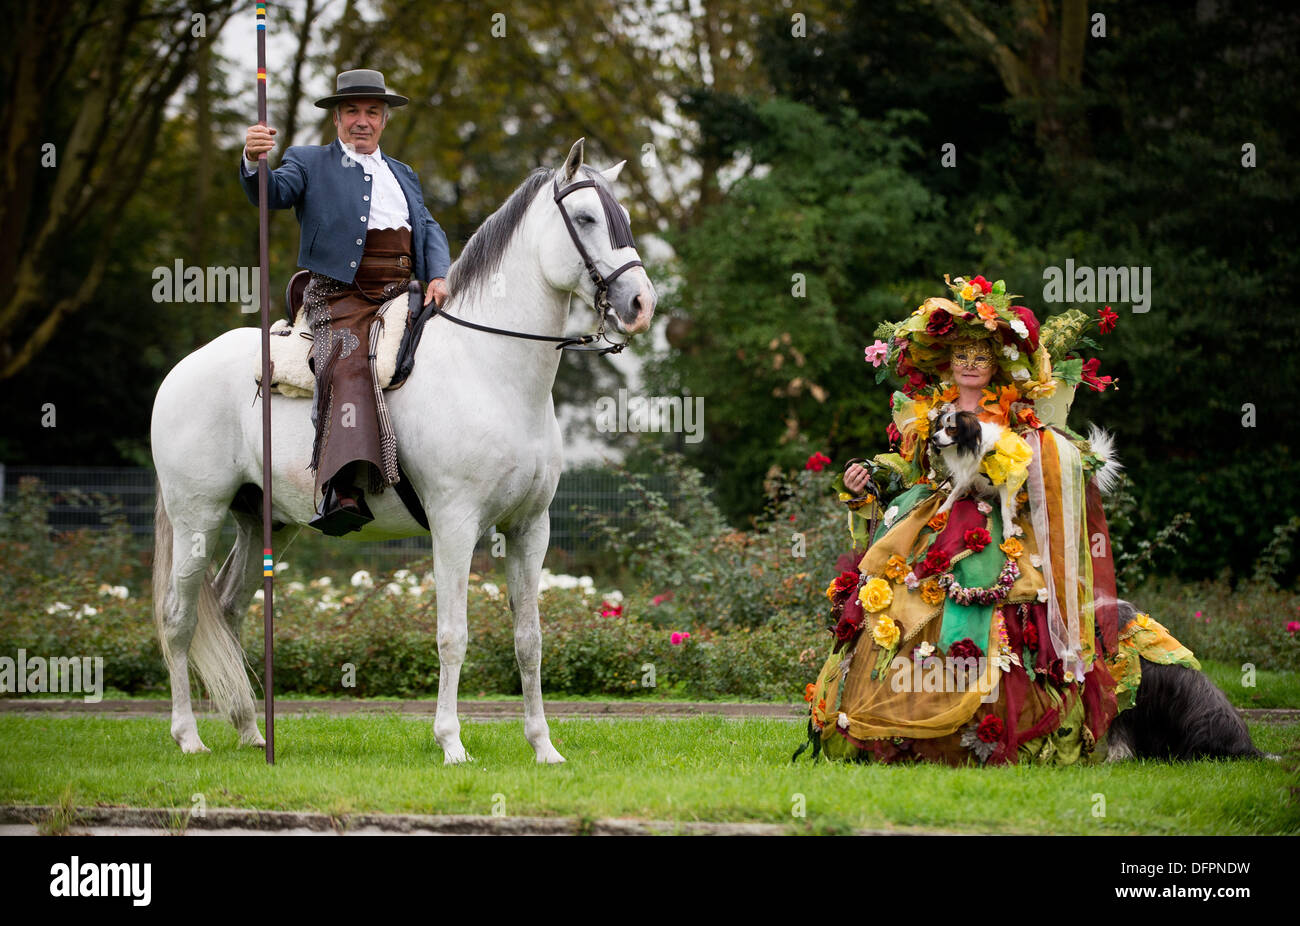 Dortmund, Germany. 08th Oct, 2013. Model Diego on horse Danzarin and model Heike pose in Dortmund, Germany, 08 October 2013. The demonstration is an advertisement for the trade show 'Dog and Horse' which will take place from 11 till 13 October 2013 at Westfalenhalle in Dortmund. Photo: JAN-PHILIPP STROBEL/dpa/Alamy Live News Stock Photo